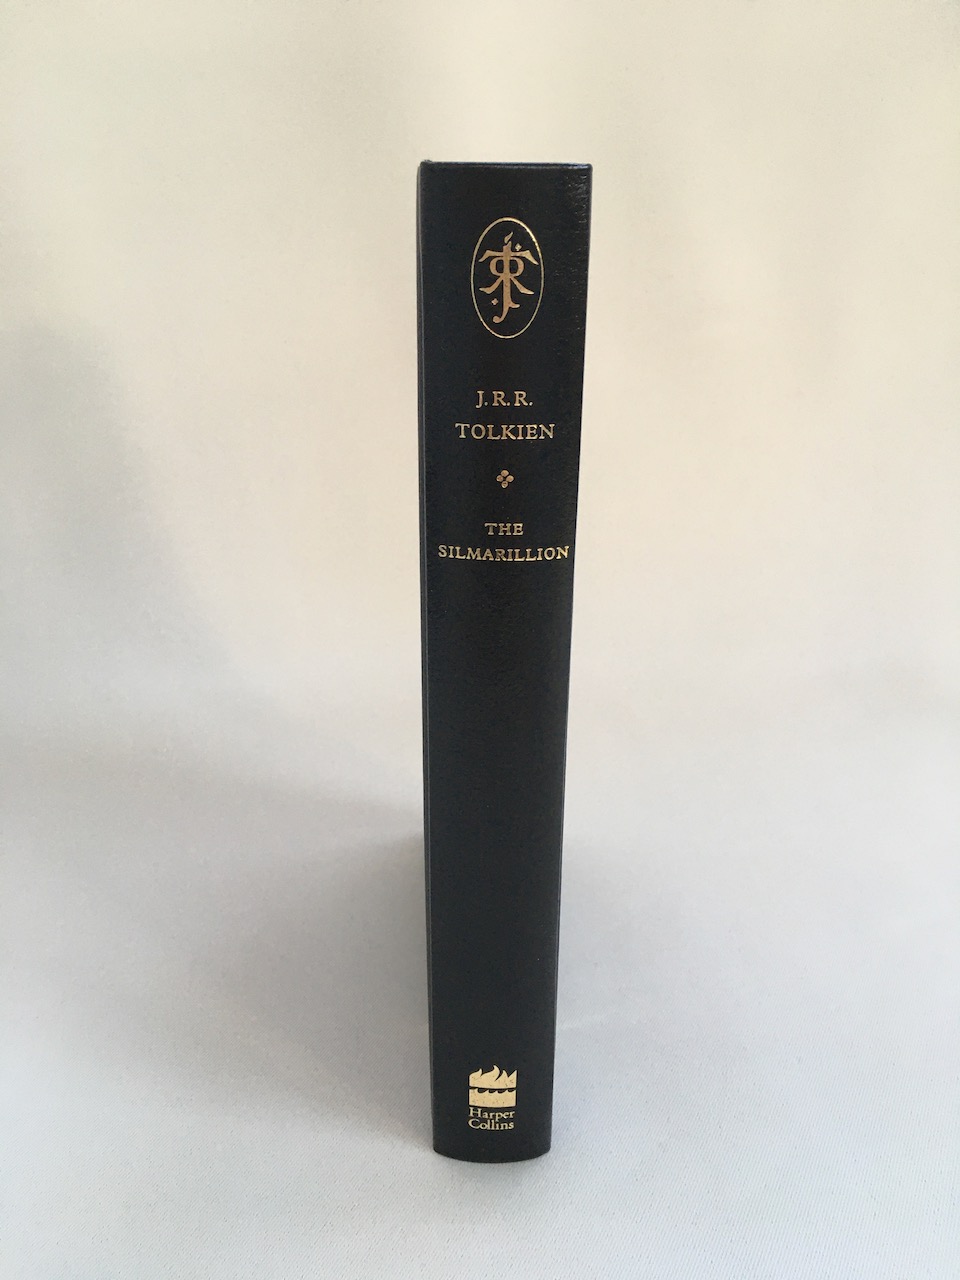 
Black Limited De Luxe edition of the Silmarillion 2002 8